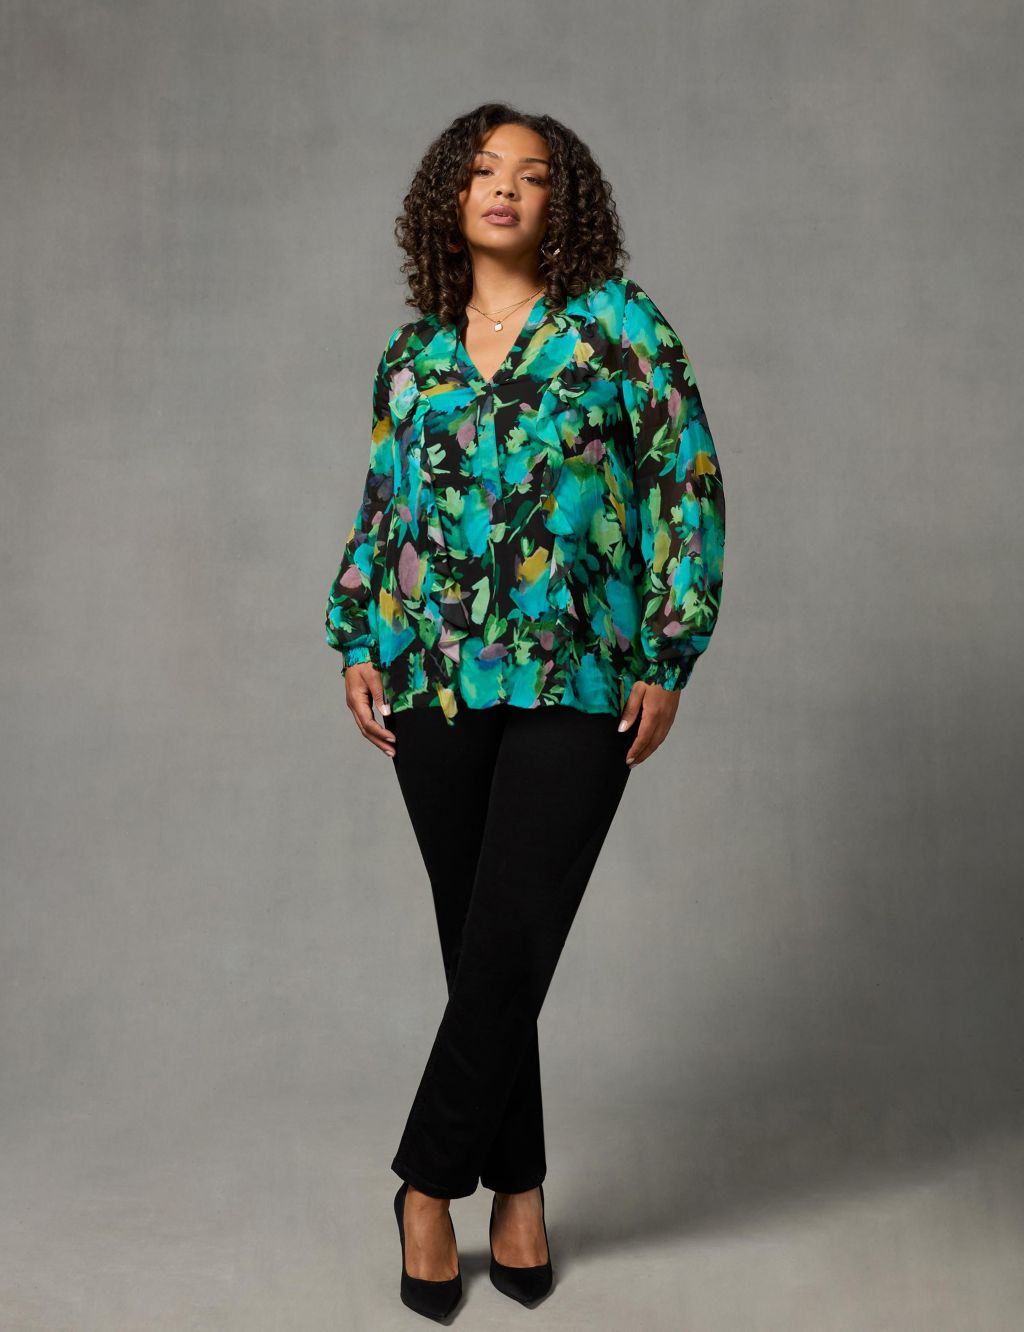 Floral Frill Detail Blouse image 1